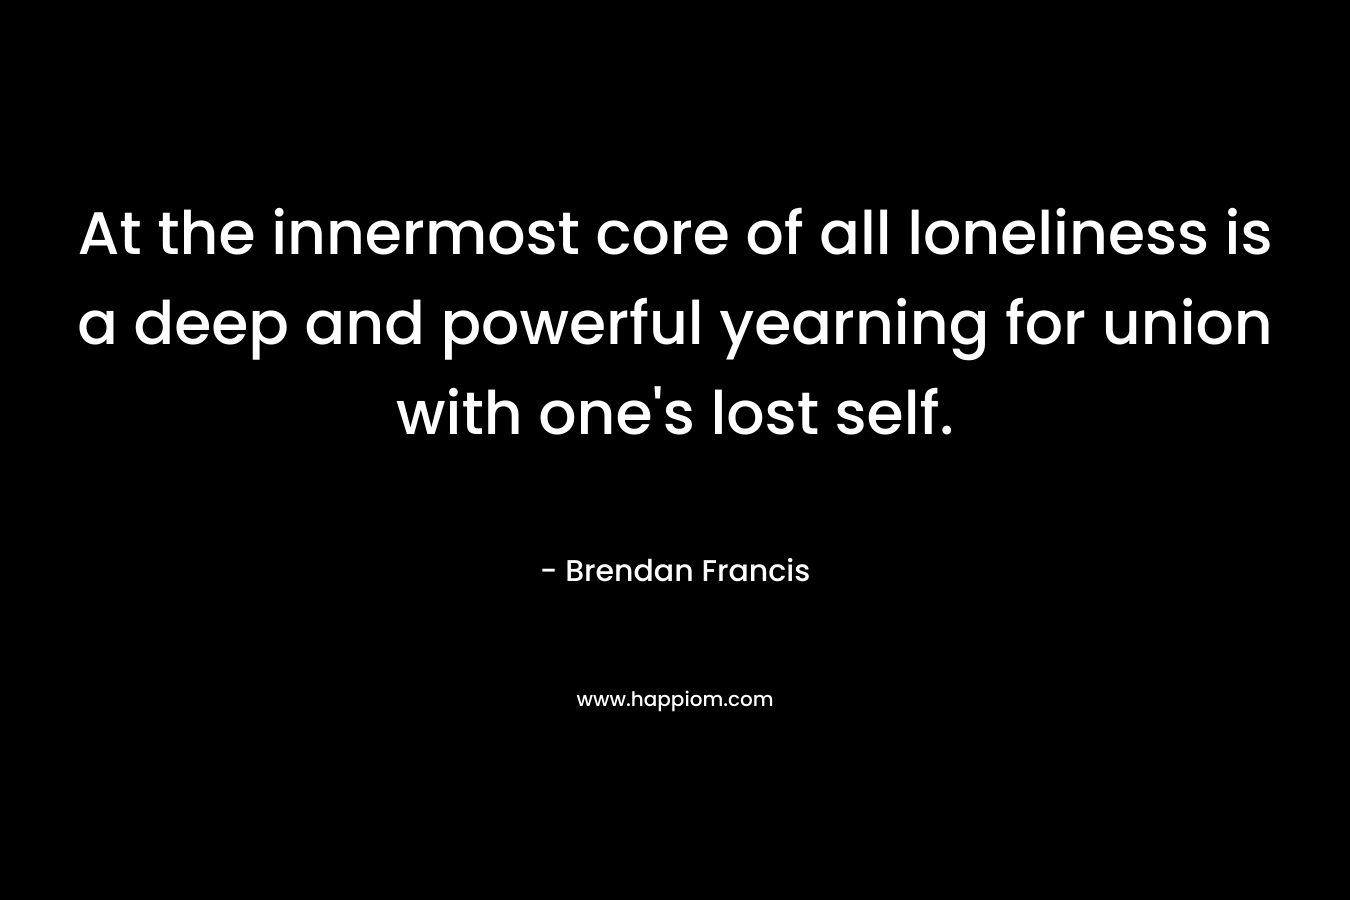 At the innermost core of all loneliness is a deep and powerful yearning for union with one's lost self.